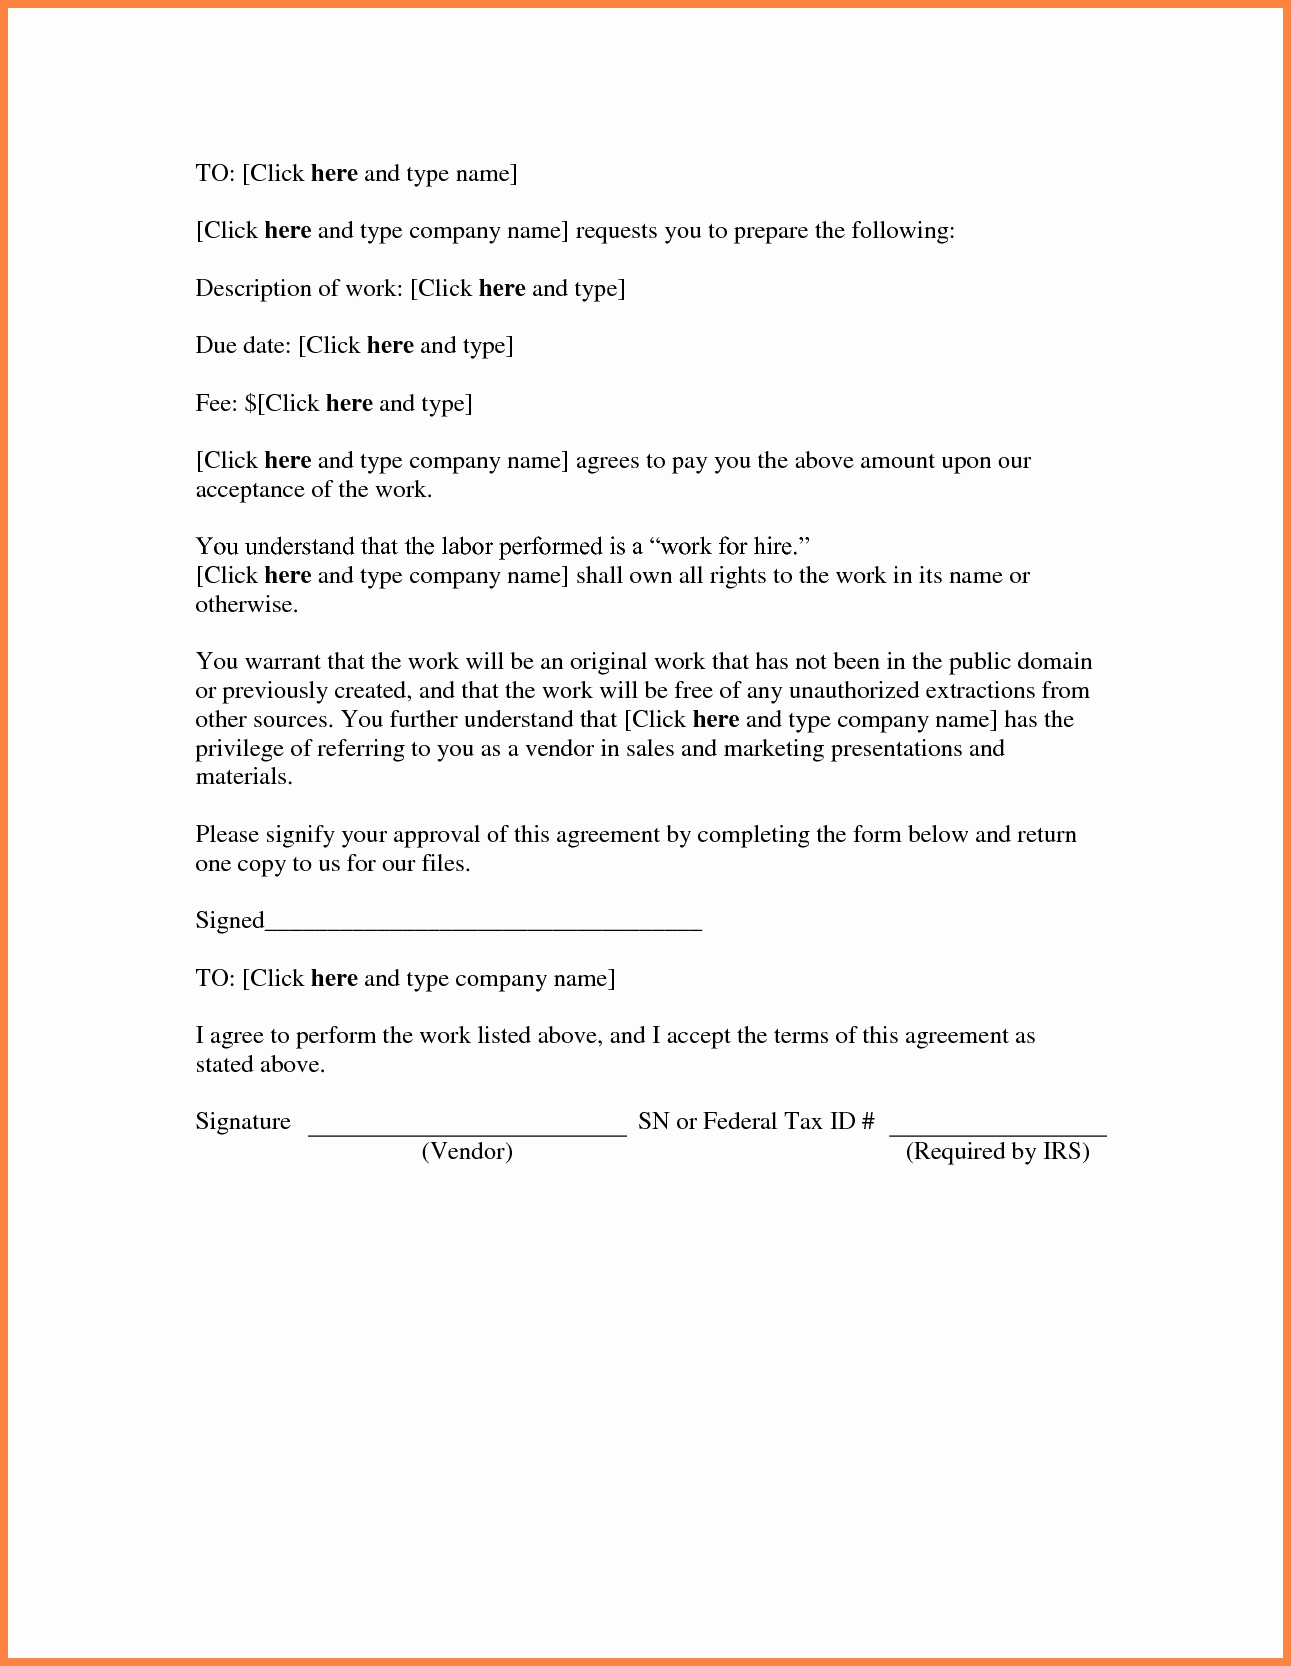 Work for Hire Agreement Template Lovely Work Agreement Sample Last 7 Sample Work for Hire